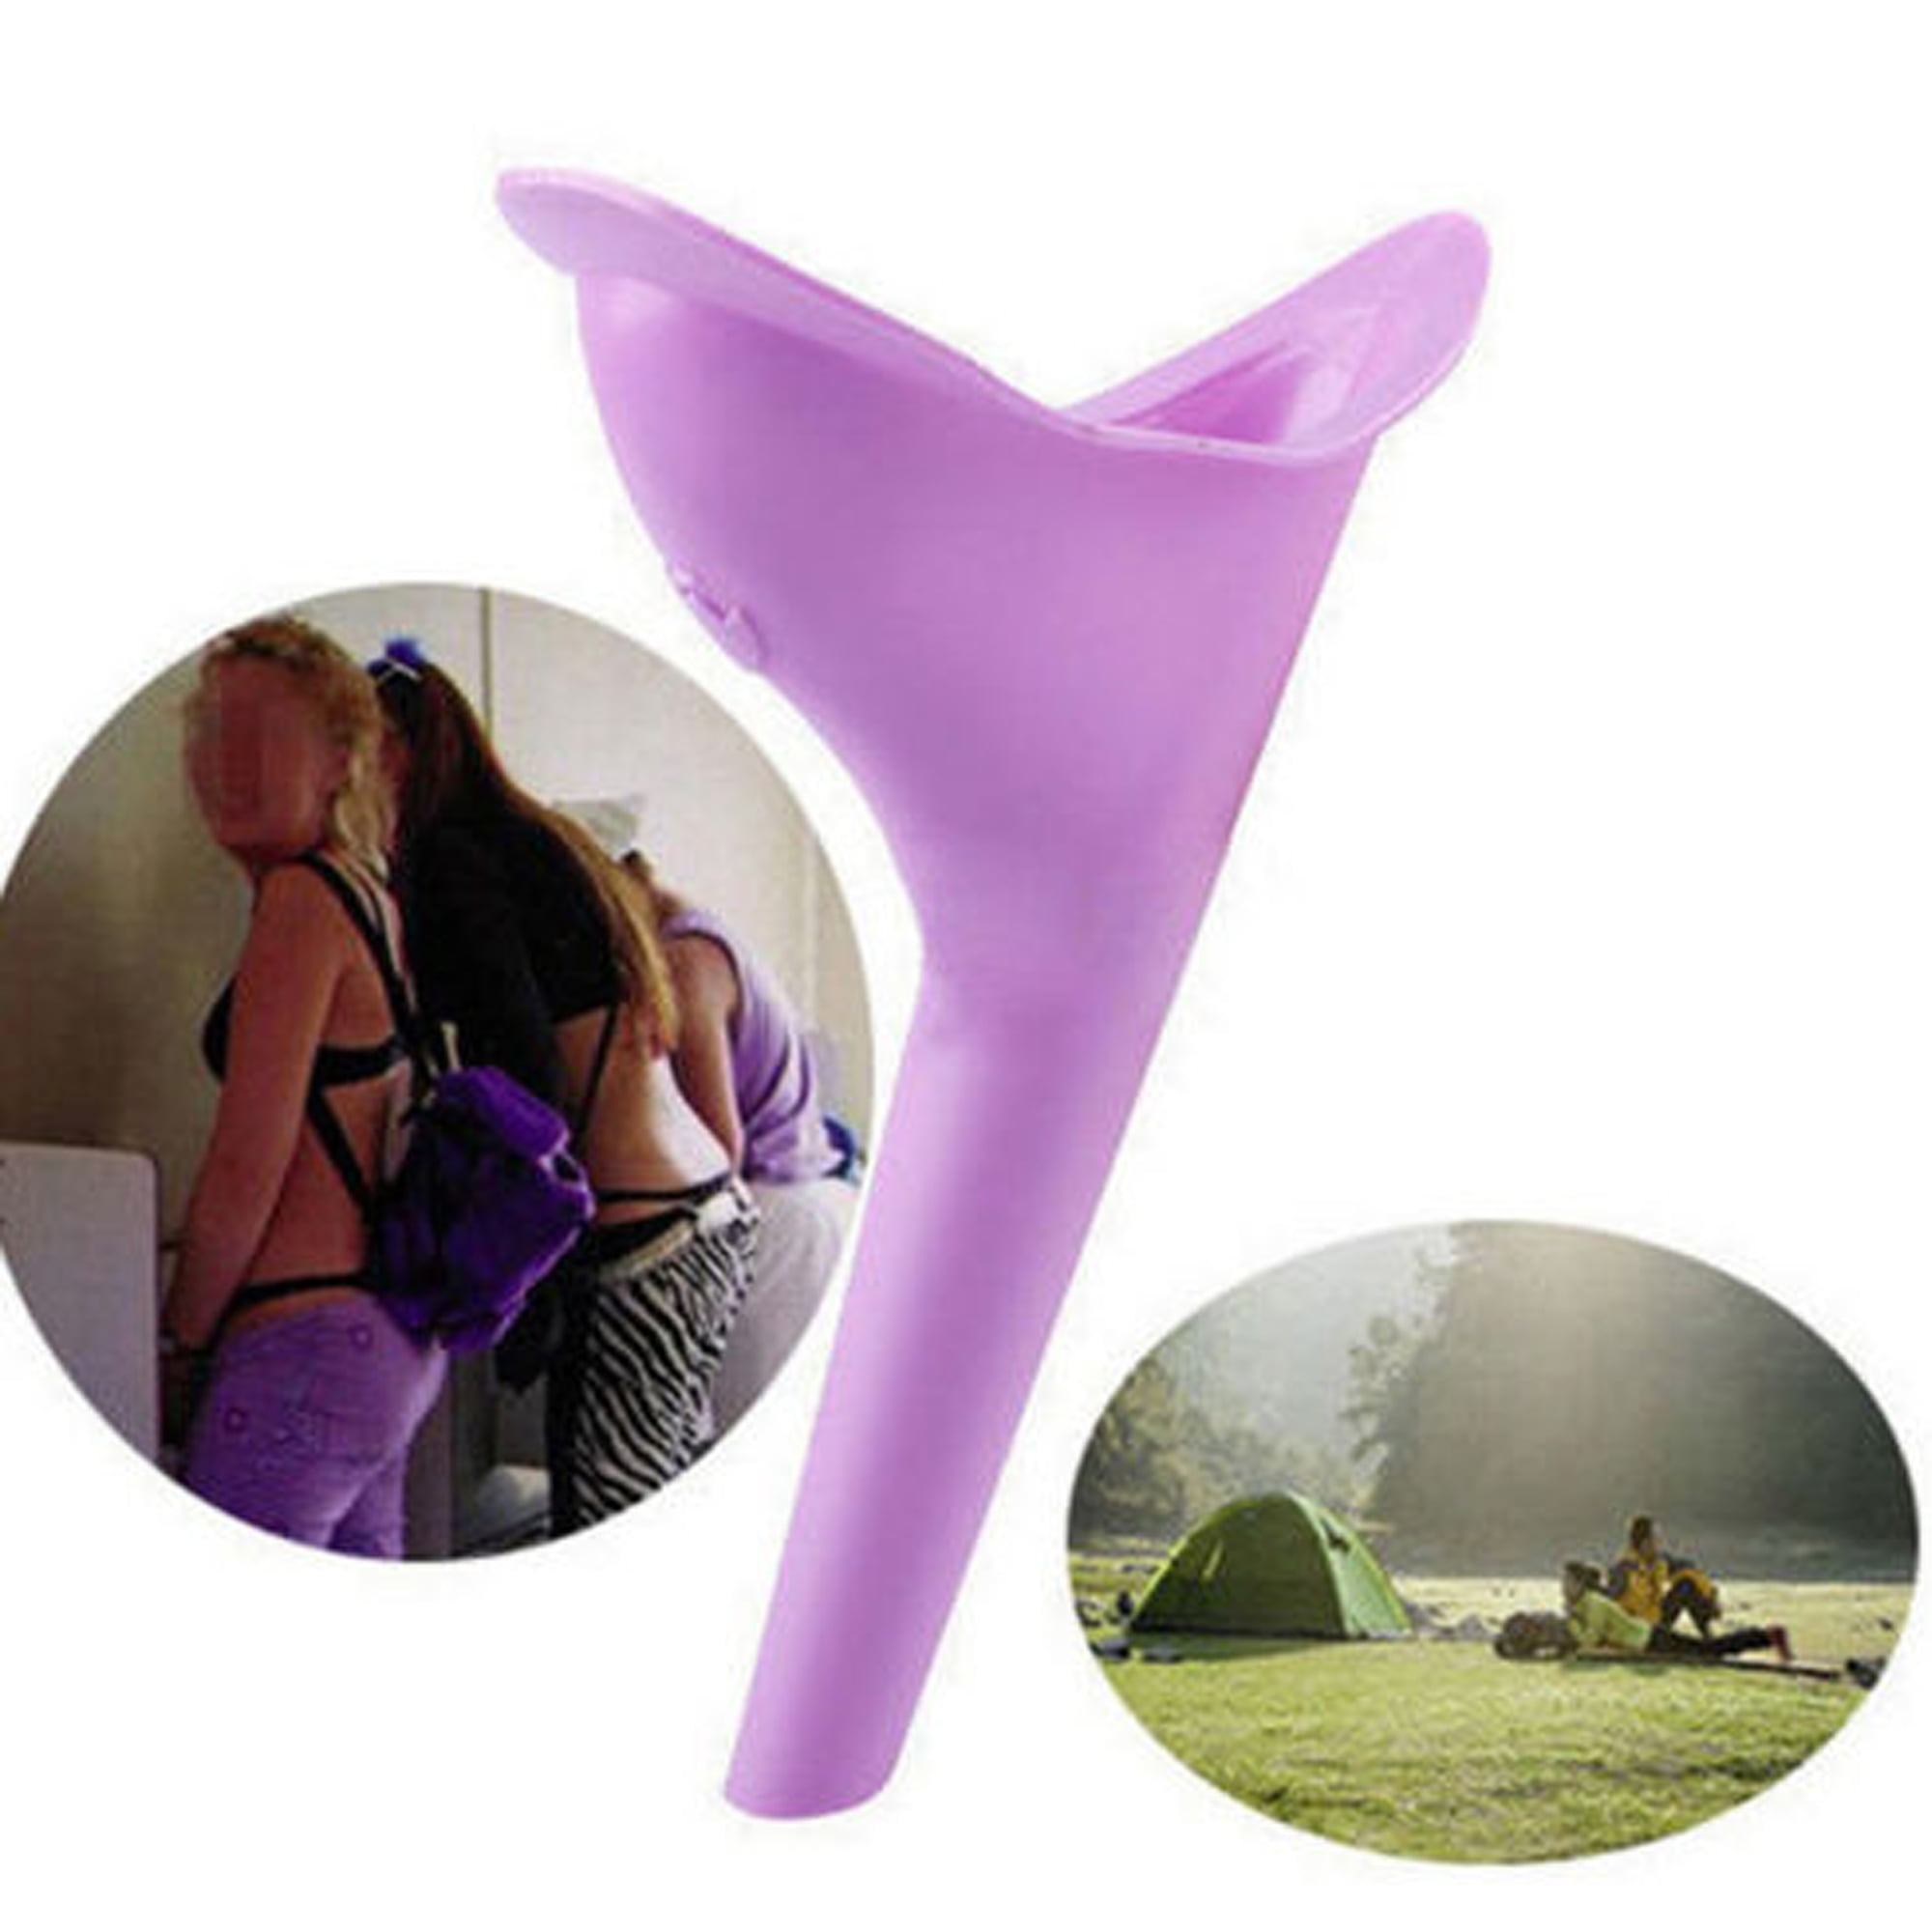 SUNJULY Female Ladies Urinal Wee Funnel Sanitary Toilet Aid for Women Pee While Outdoors Portable Travel Camping 